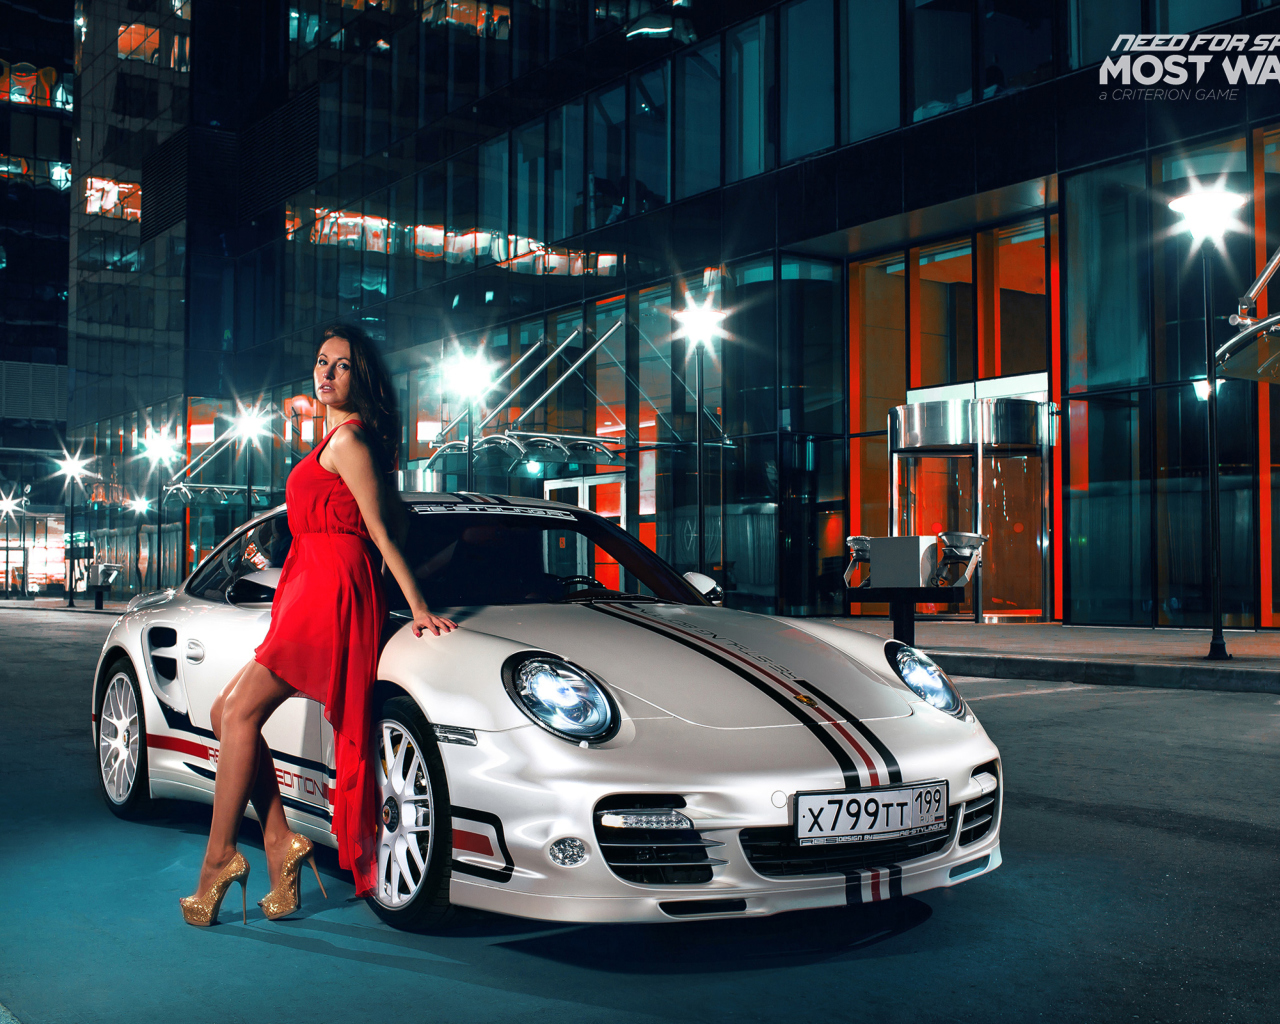 Need For Speed Most Wanted - Porsche 911 wallpaper 1280x1024